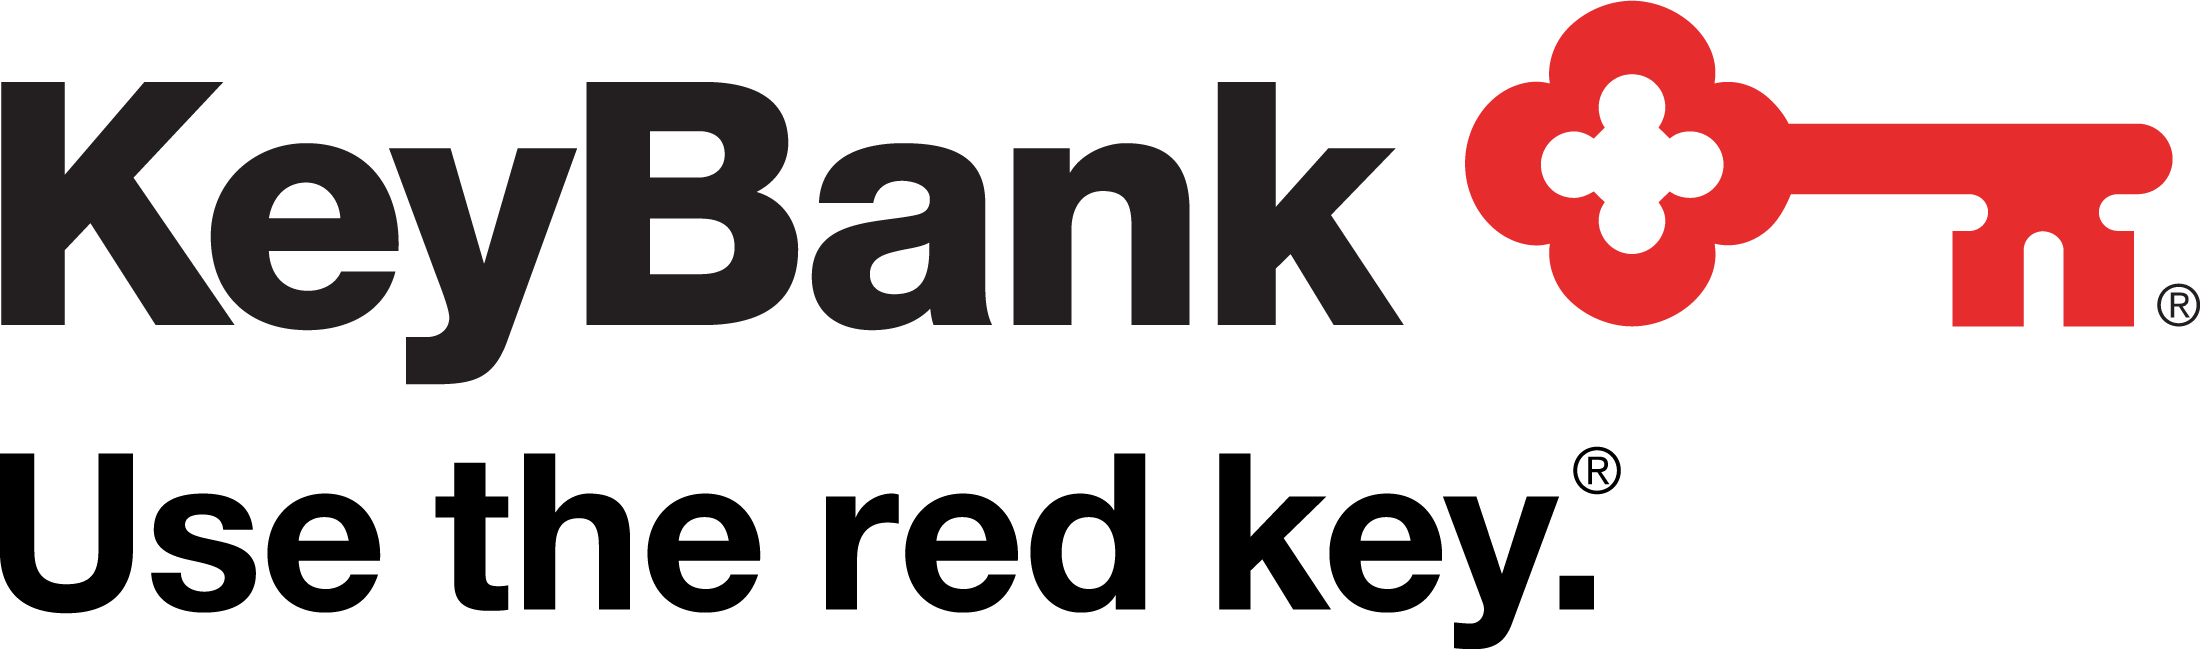 keybank logo - Middle Market Business Sentiment Report: Benefits and Opportunities of Payment Automation